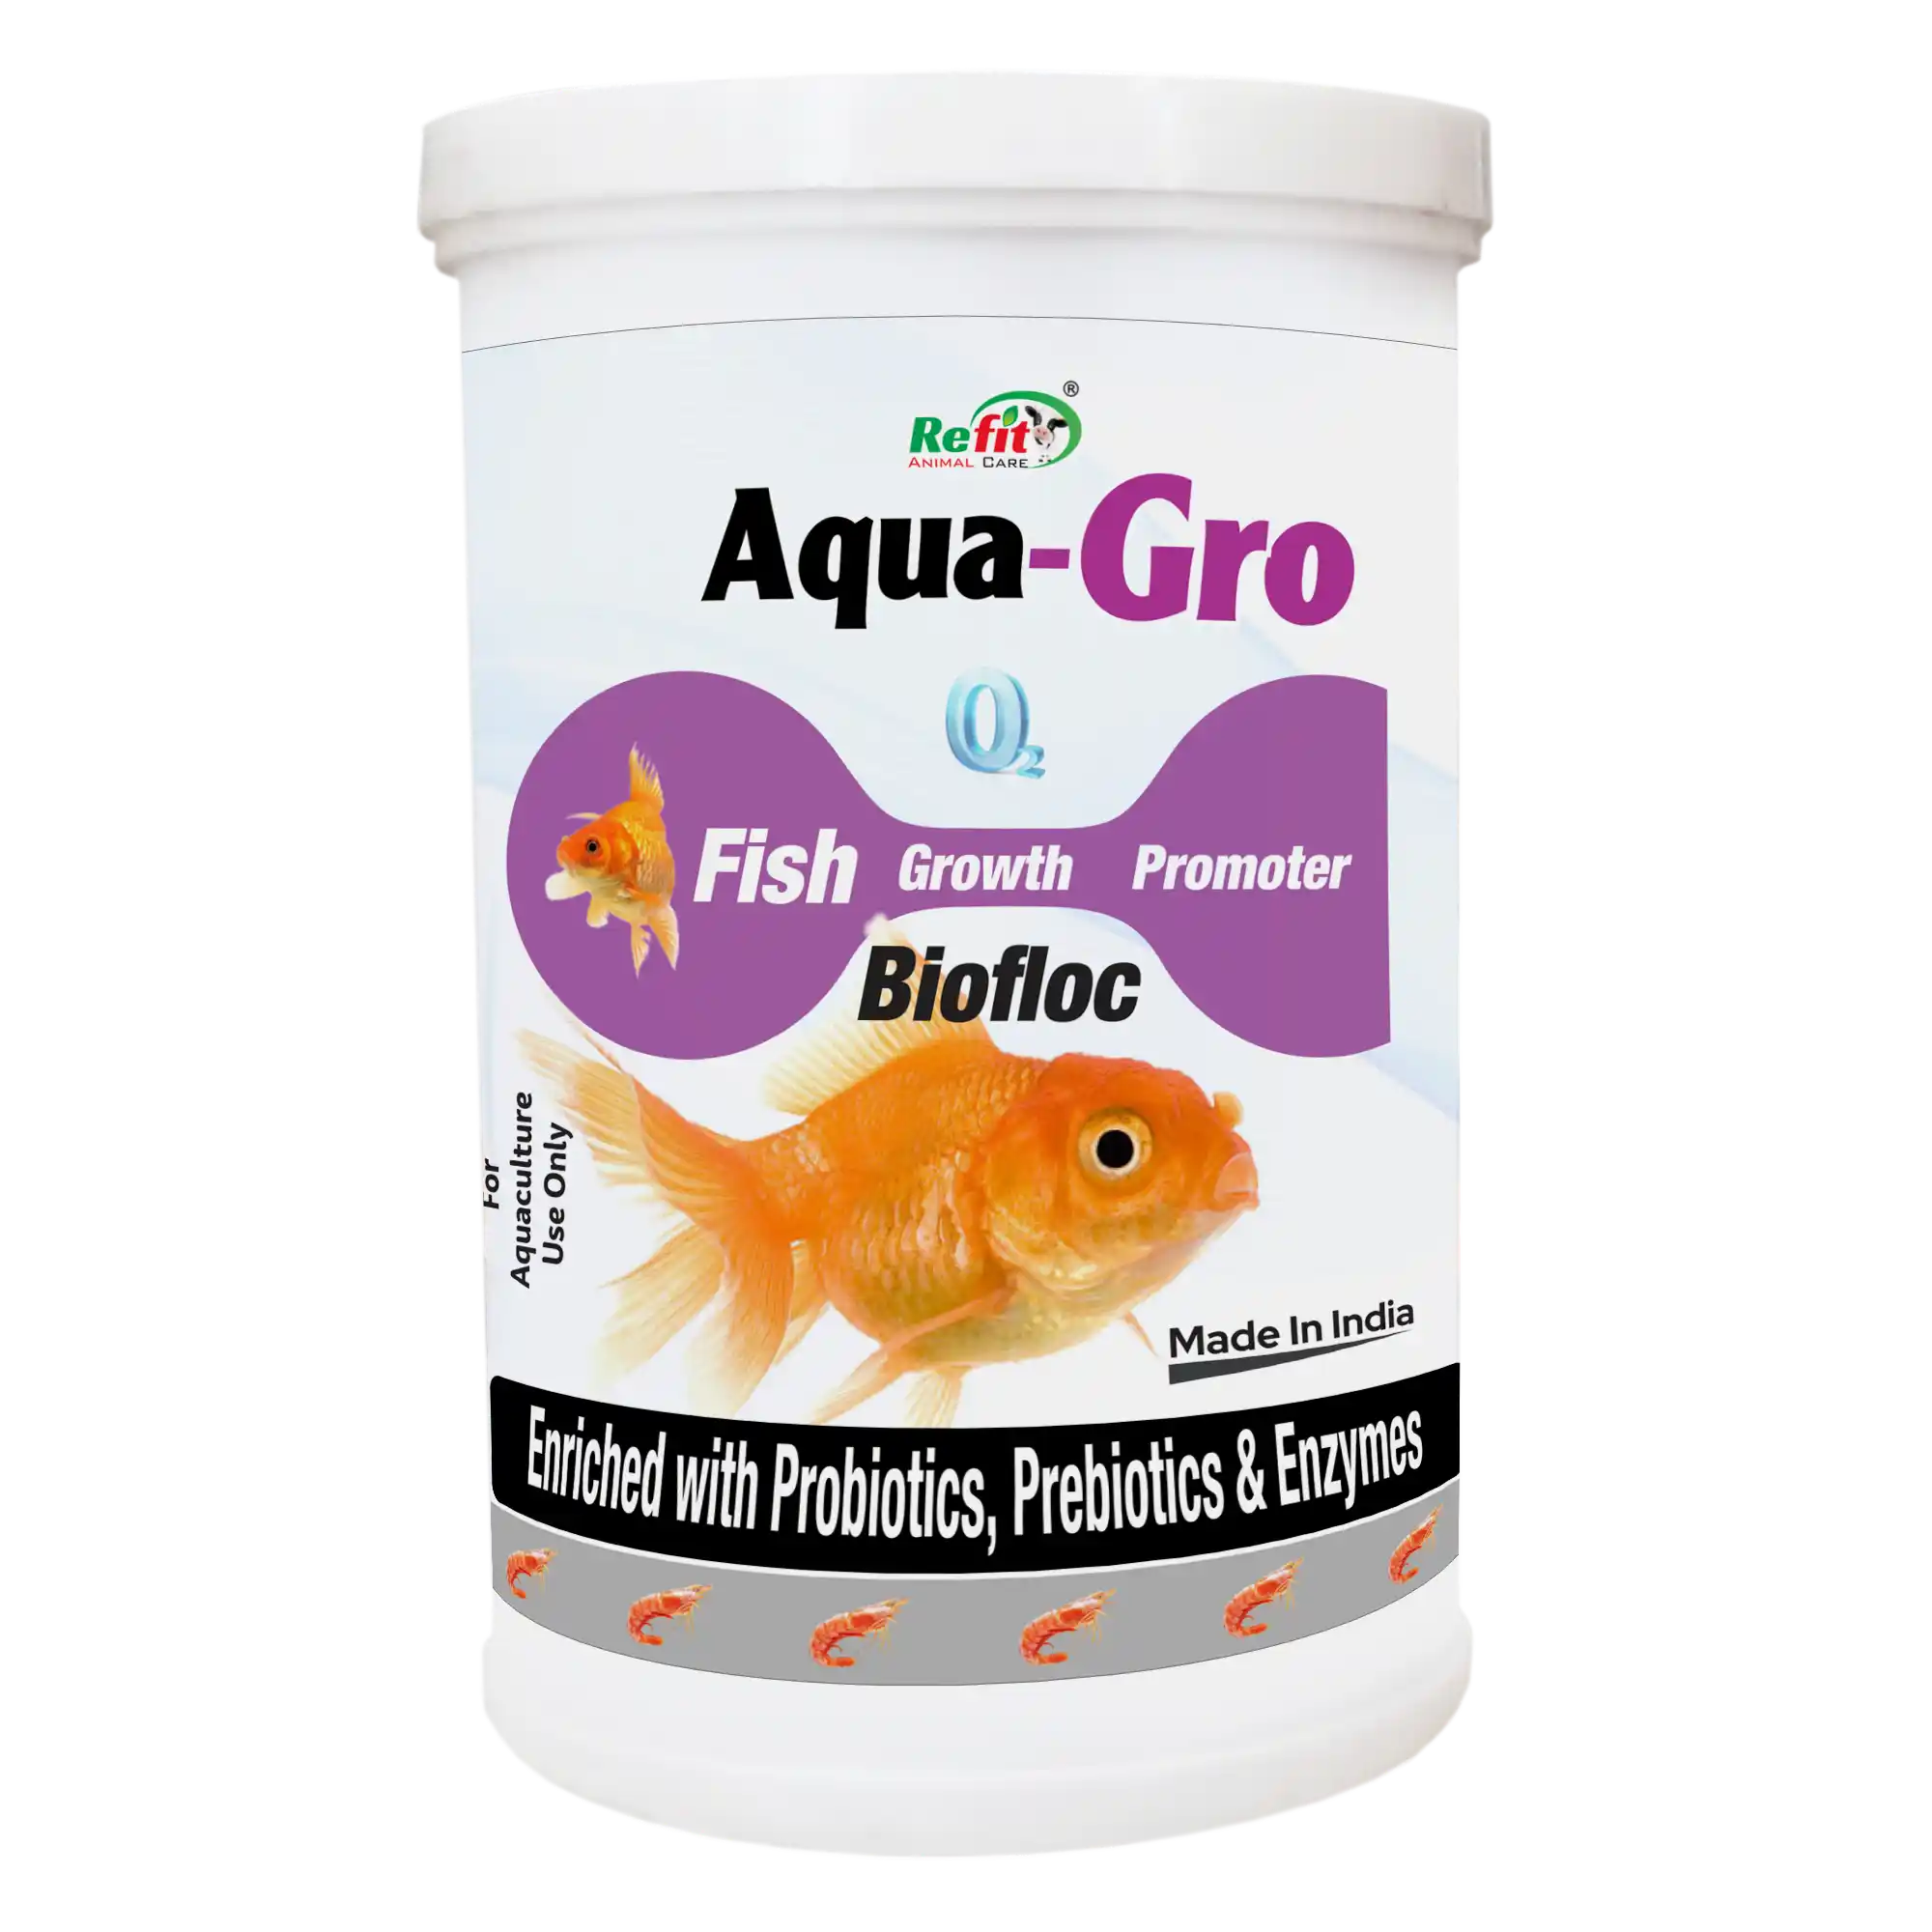 growth promoter for fish